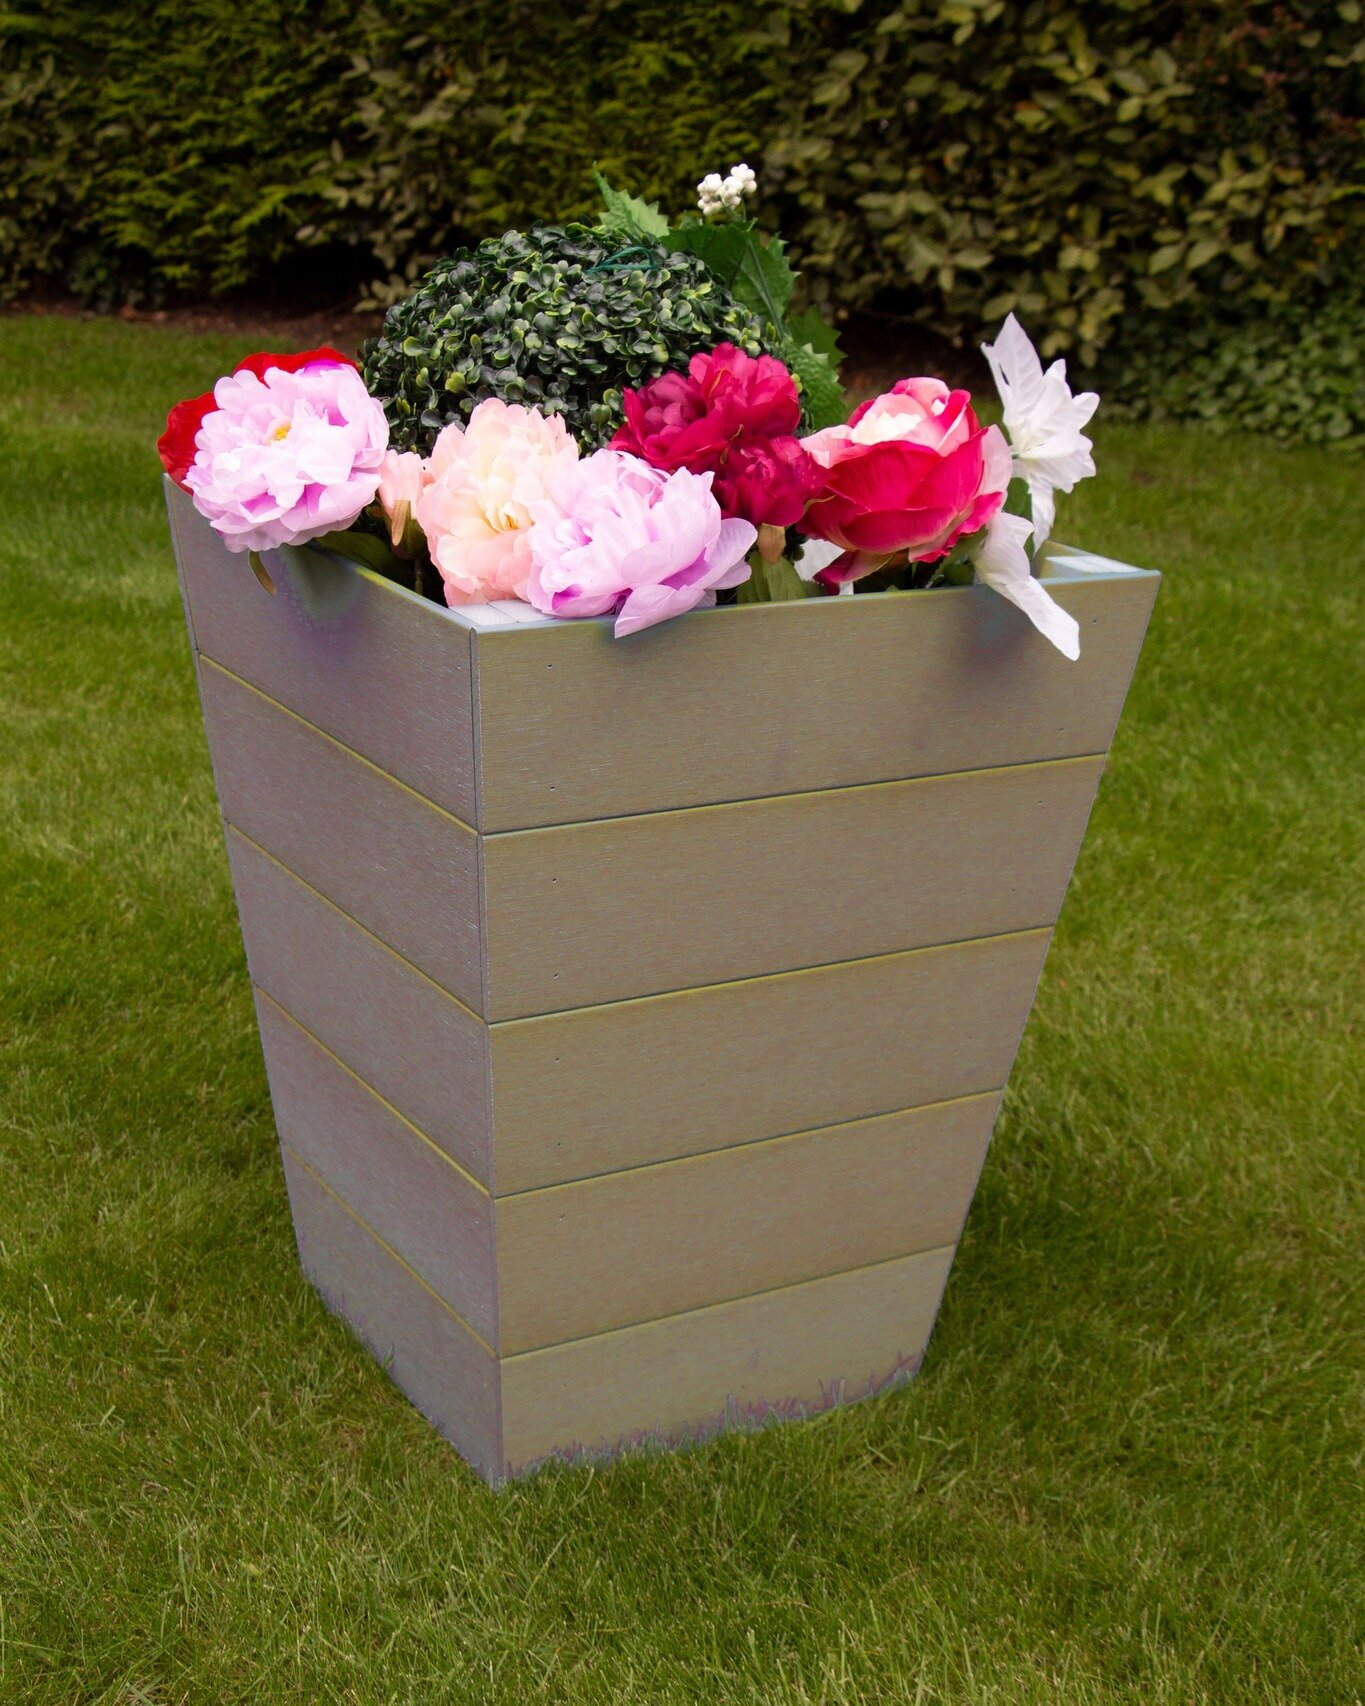 We also offer a range of planters!

Available in Stone Grey, Duck Egg Green, Powder Blue &amp; New Teak

&bull; Weather resistant
&bull; No treatment required
&bull; Easy to assemble
&bull; UV resistant
&bull; Wipe clean
&bull; Natural grain effect
&